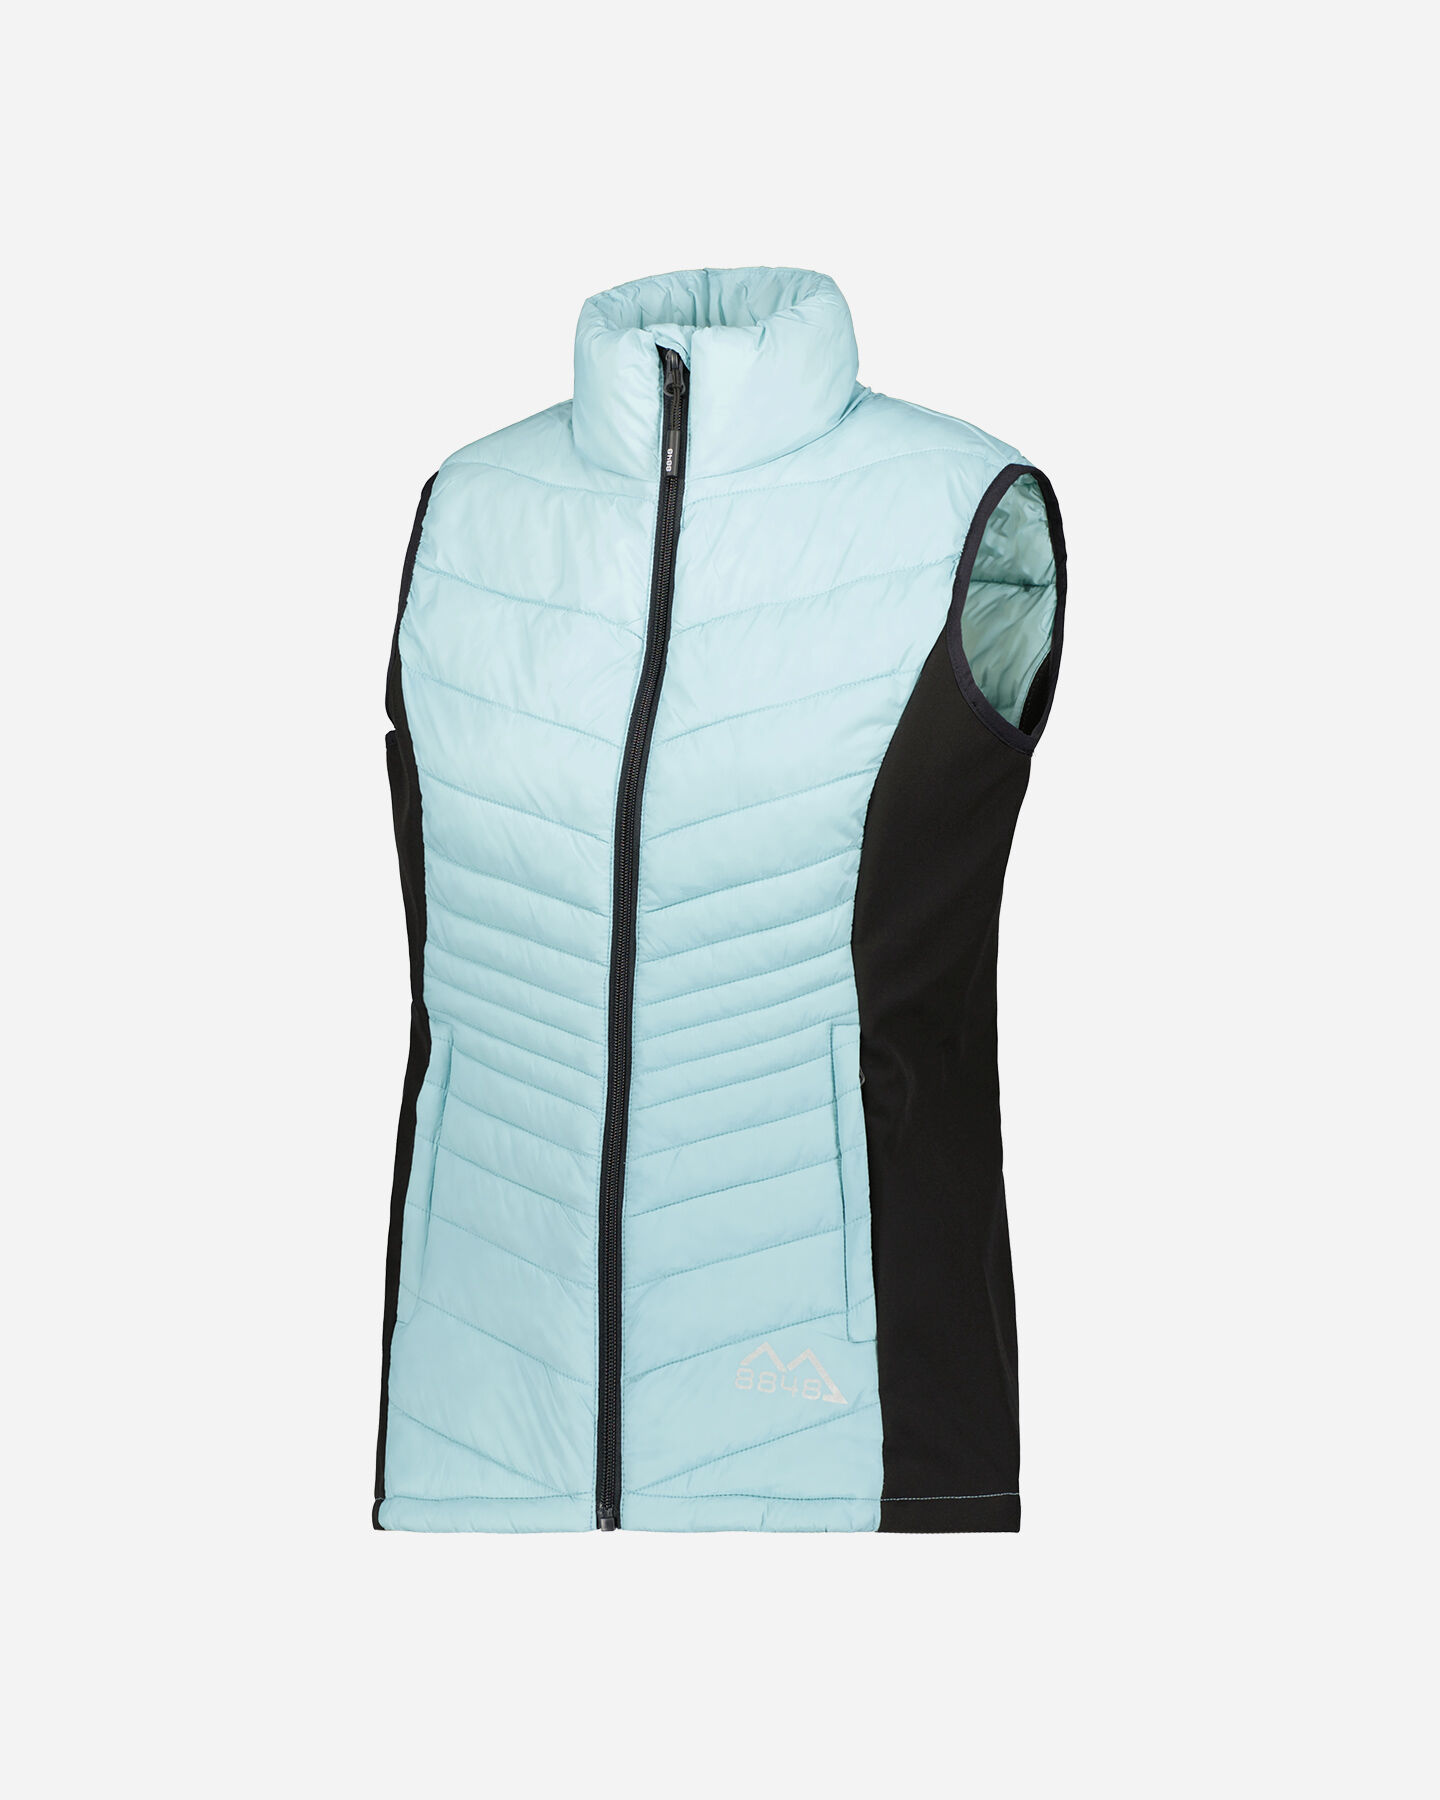  Gilet 8848 PADDED W S4109838|1134/050|M scatto 5